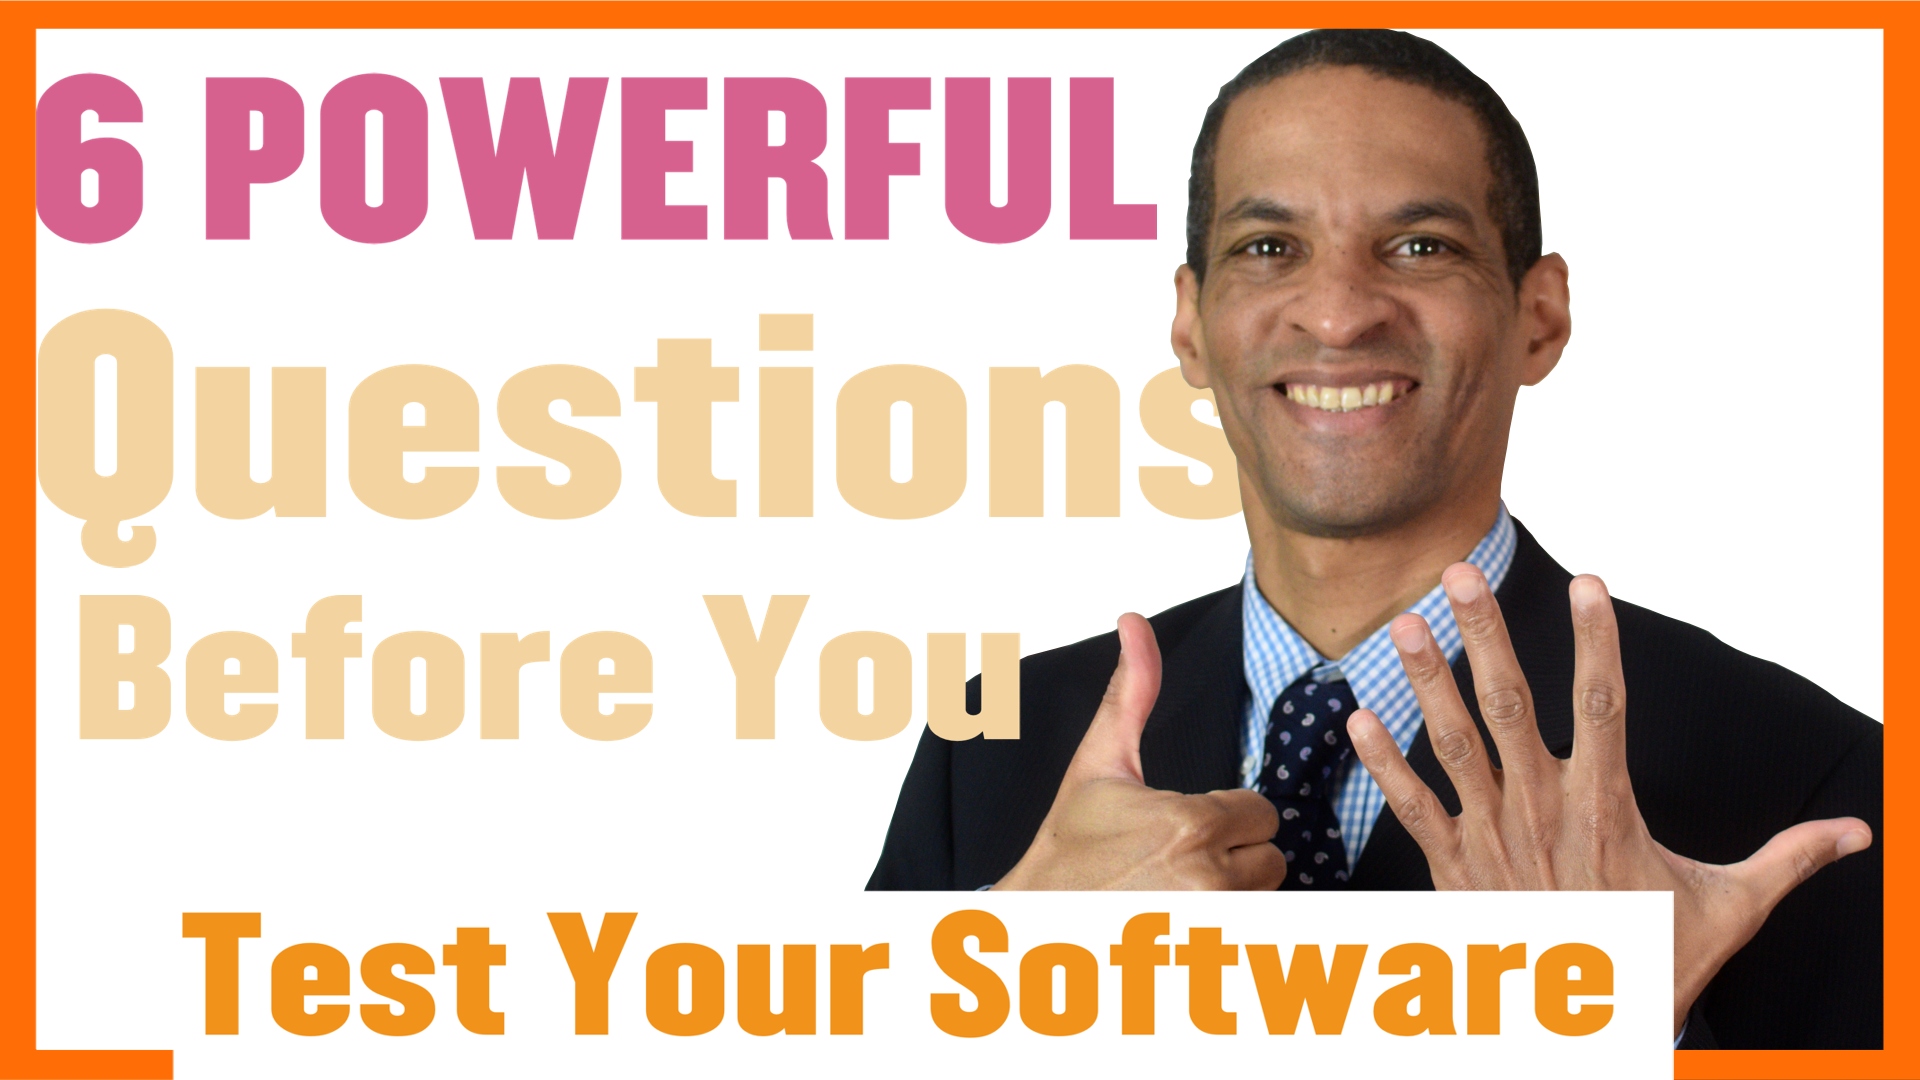 6 powerful questions